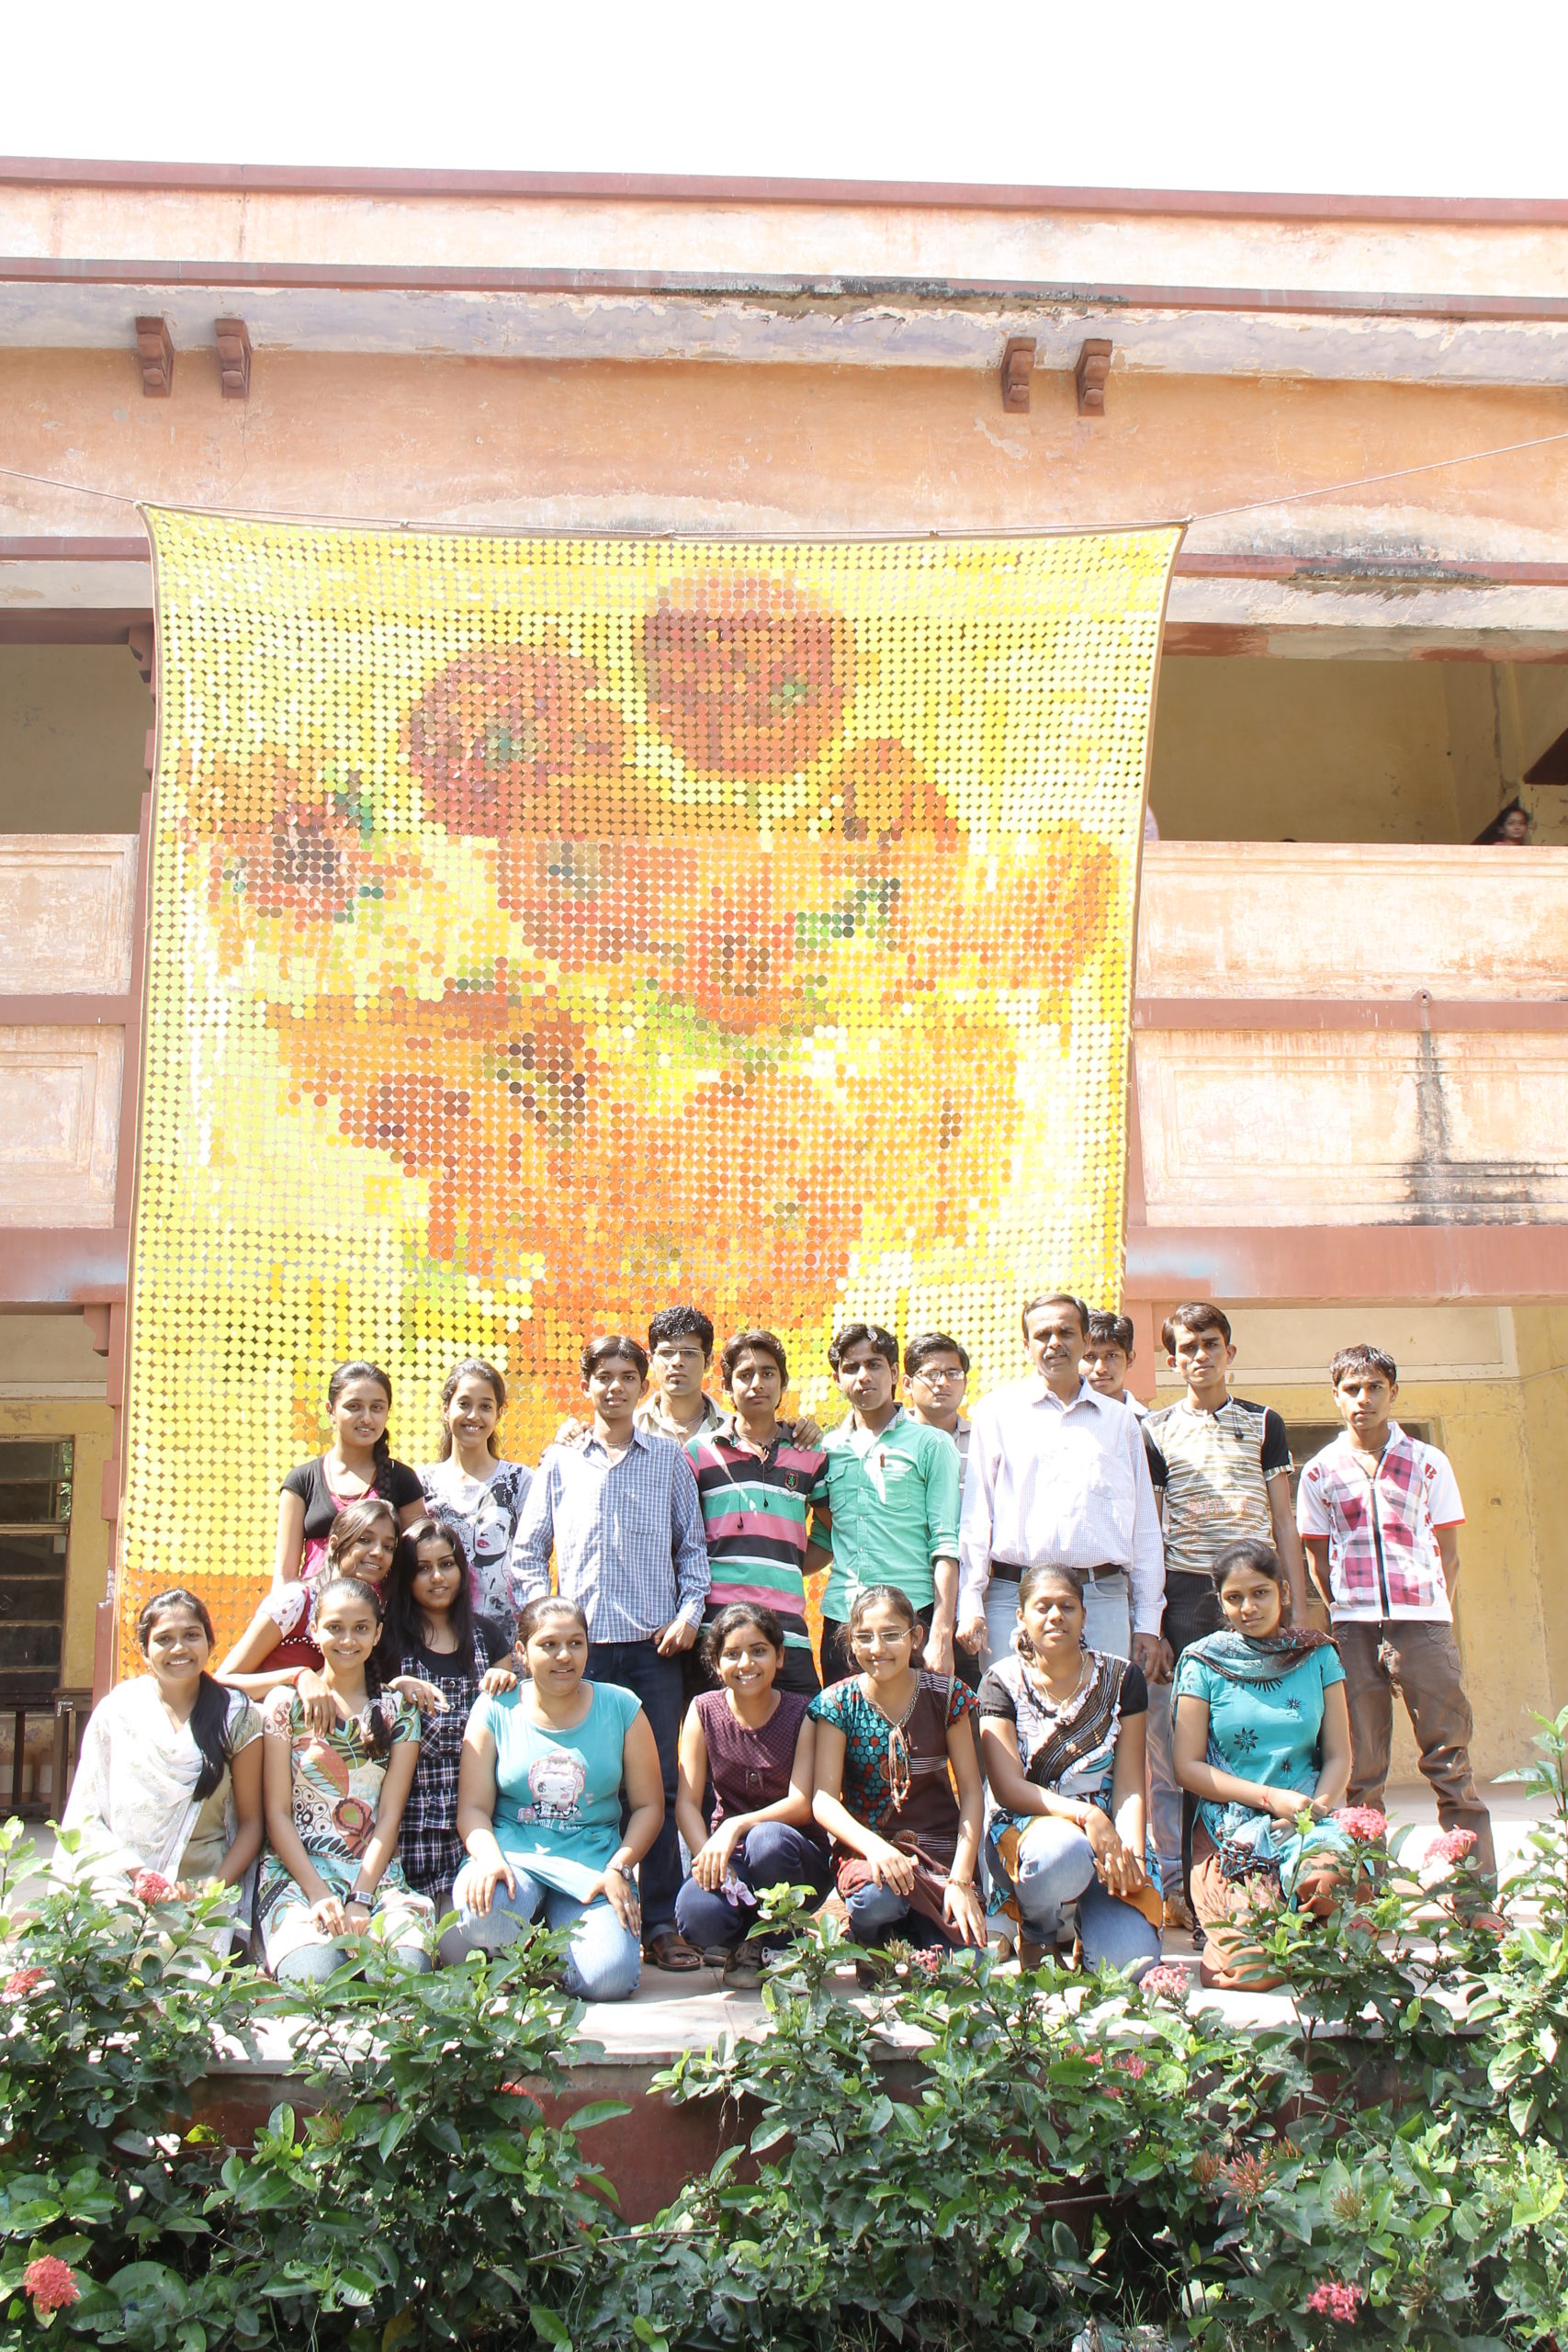  LARGEST PAINTING USING CLOTH PIXEL